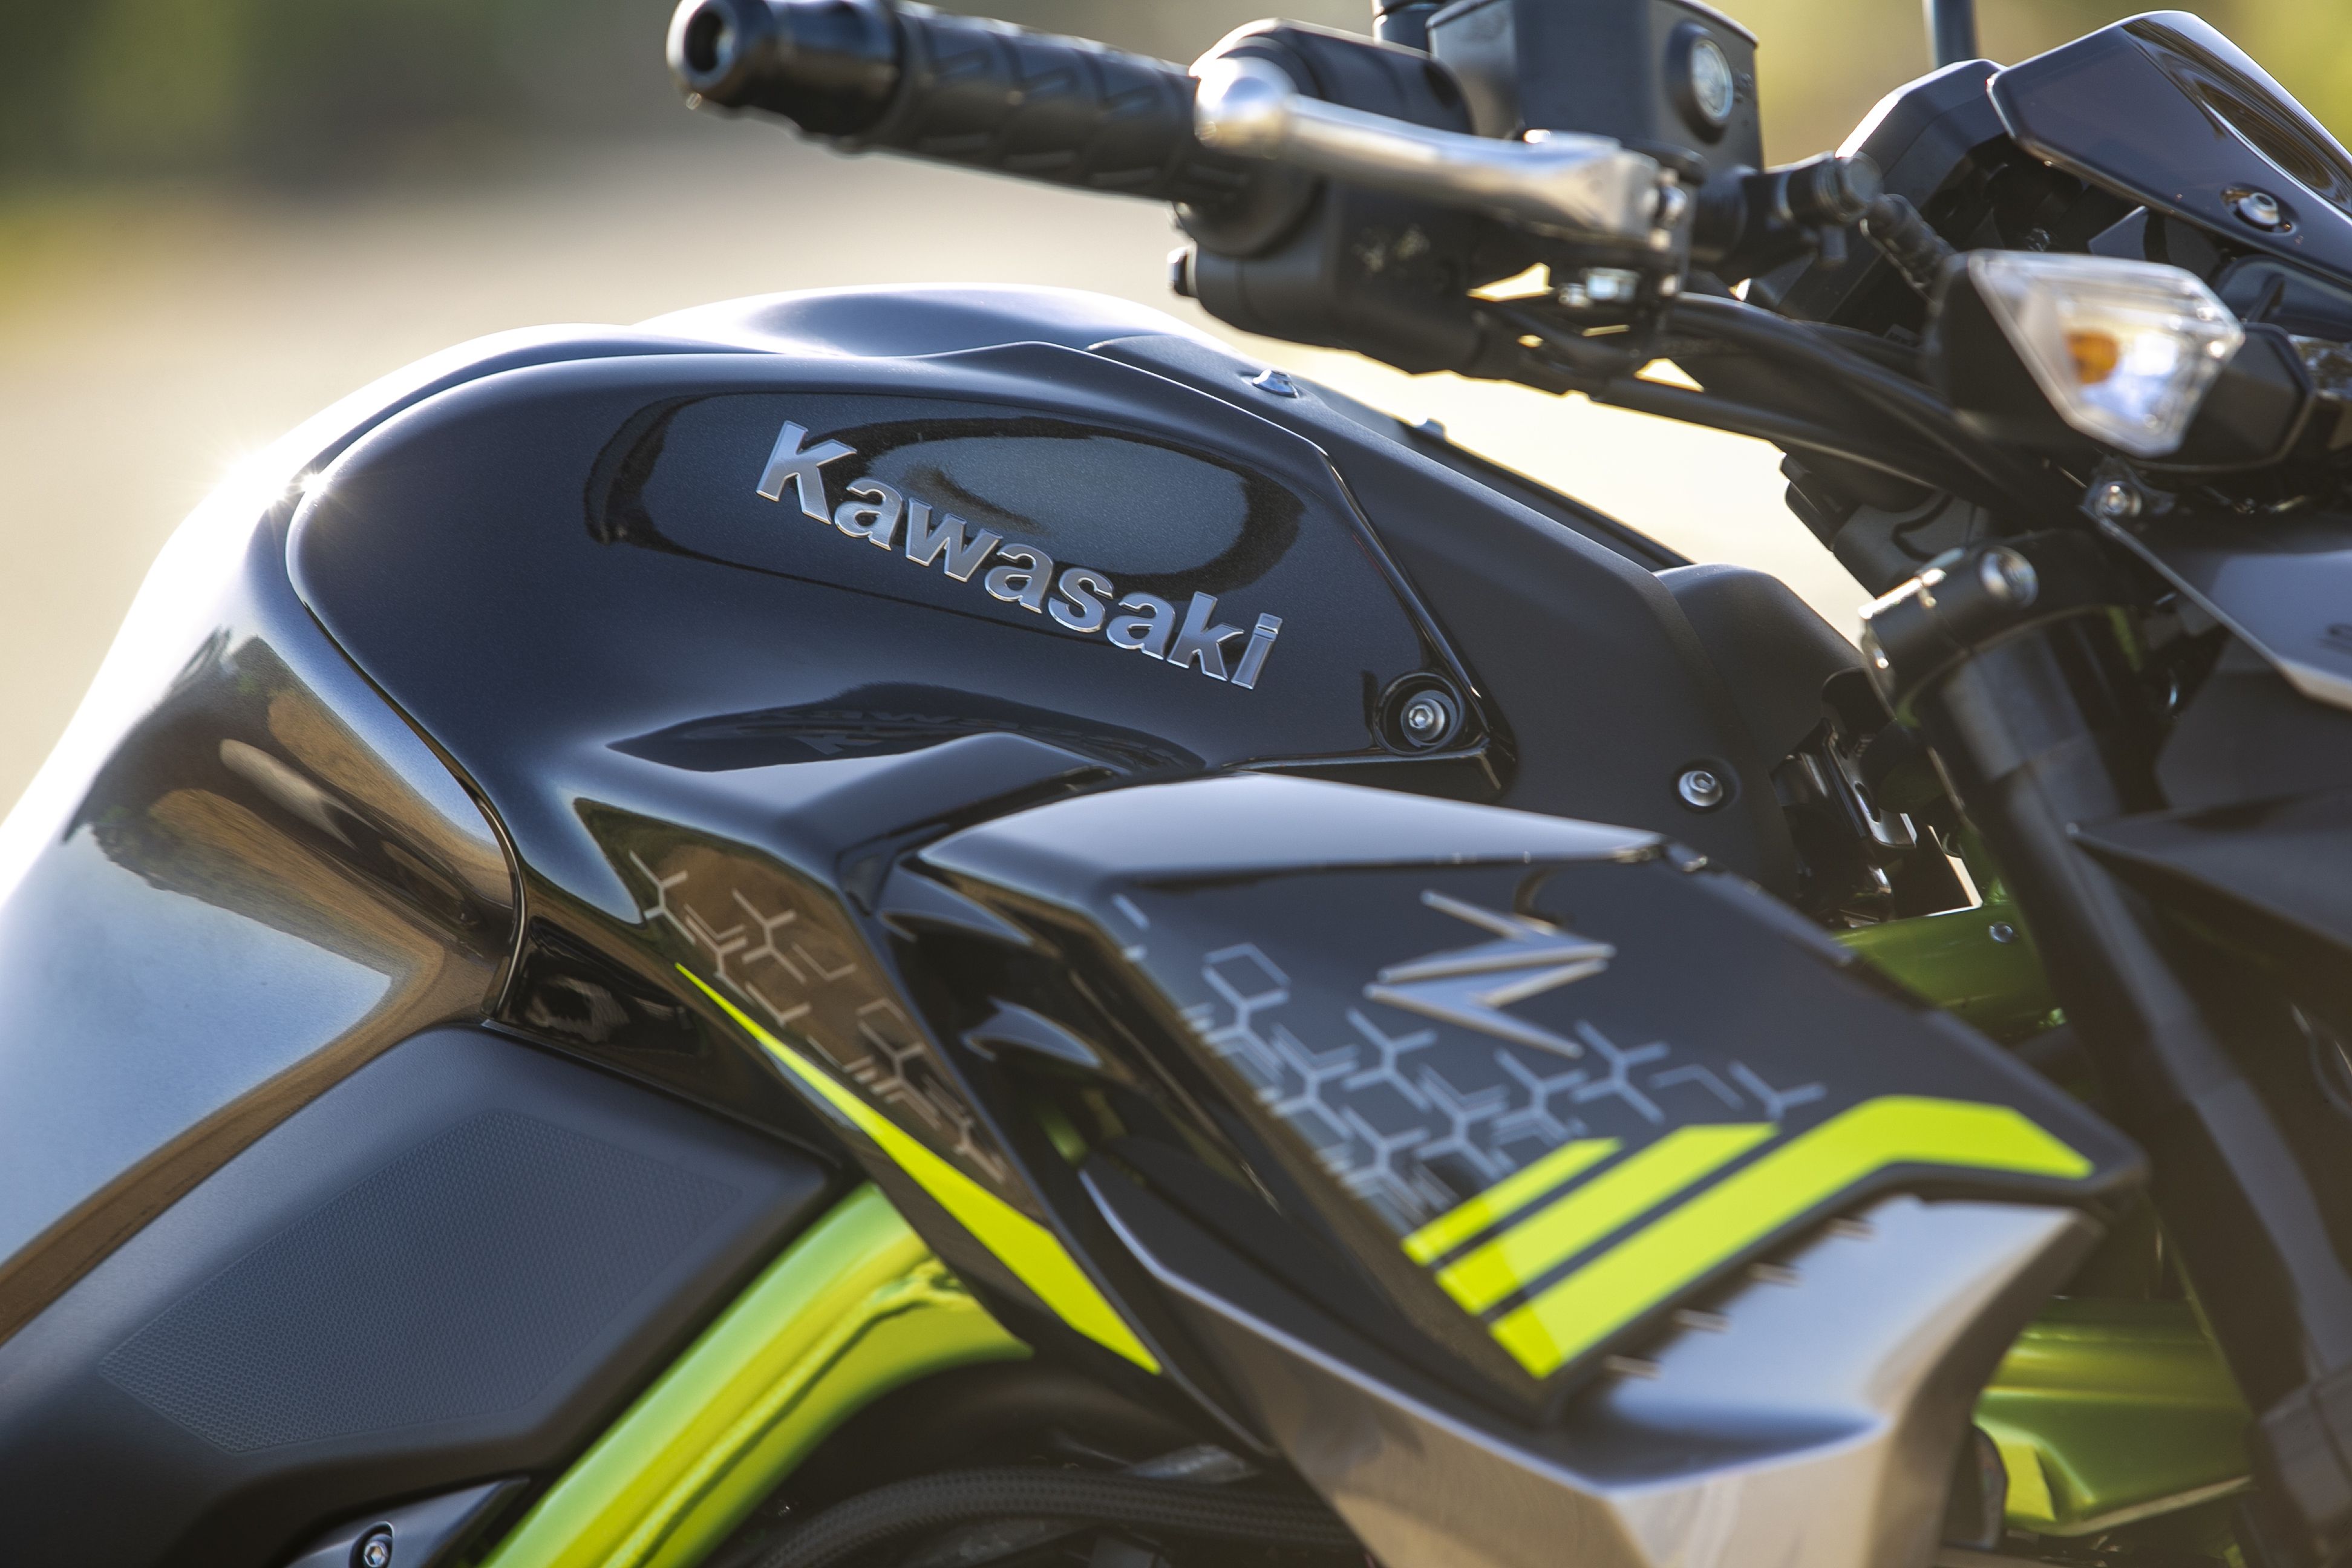 5 Things You Should Know About The 2020 Kawasaki Z900